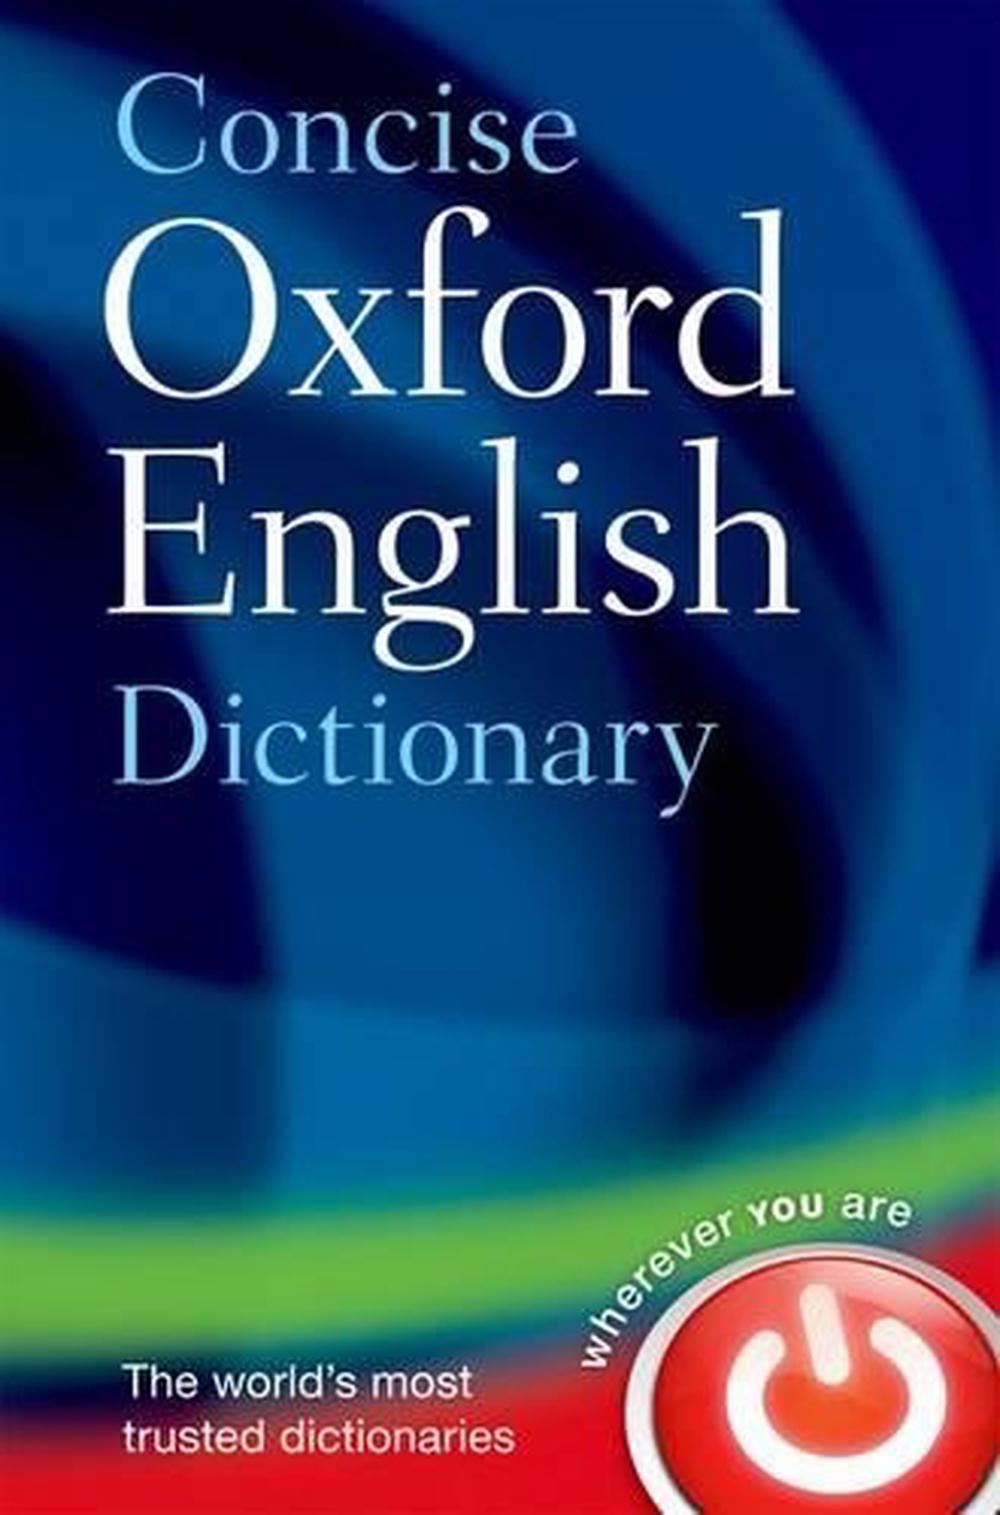 Concise Oxford English Dictionary by Oxford Languages, Hardcover